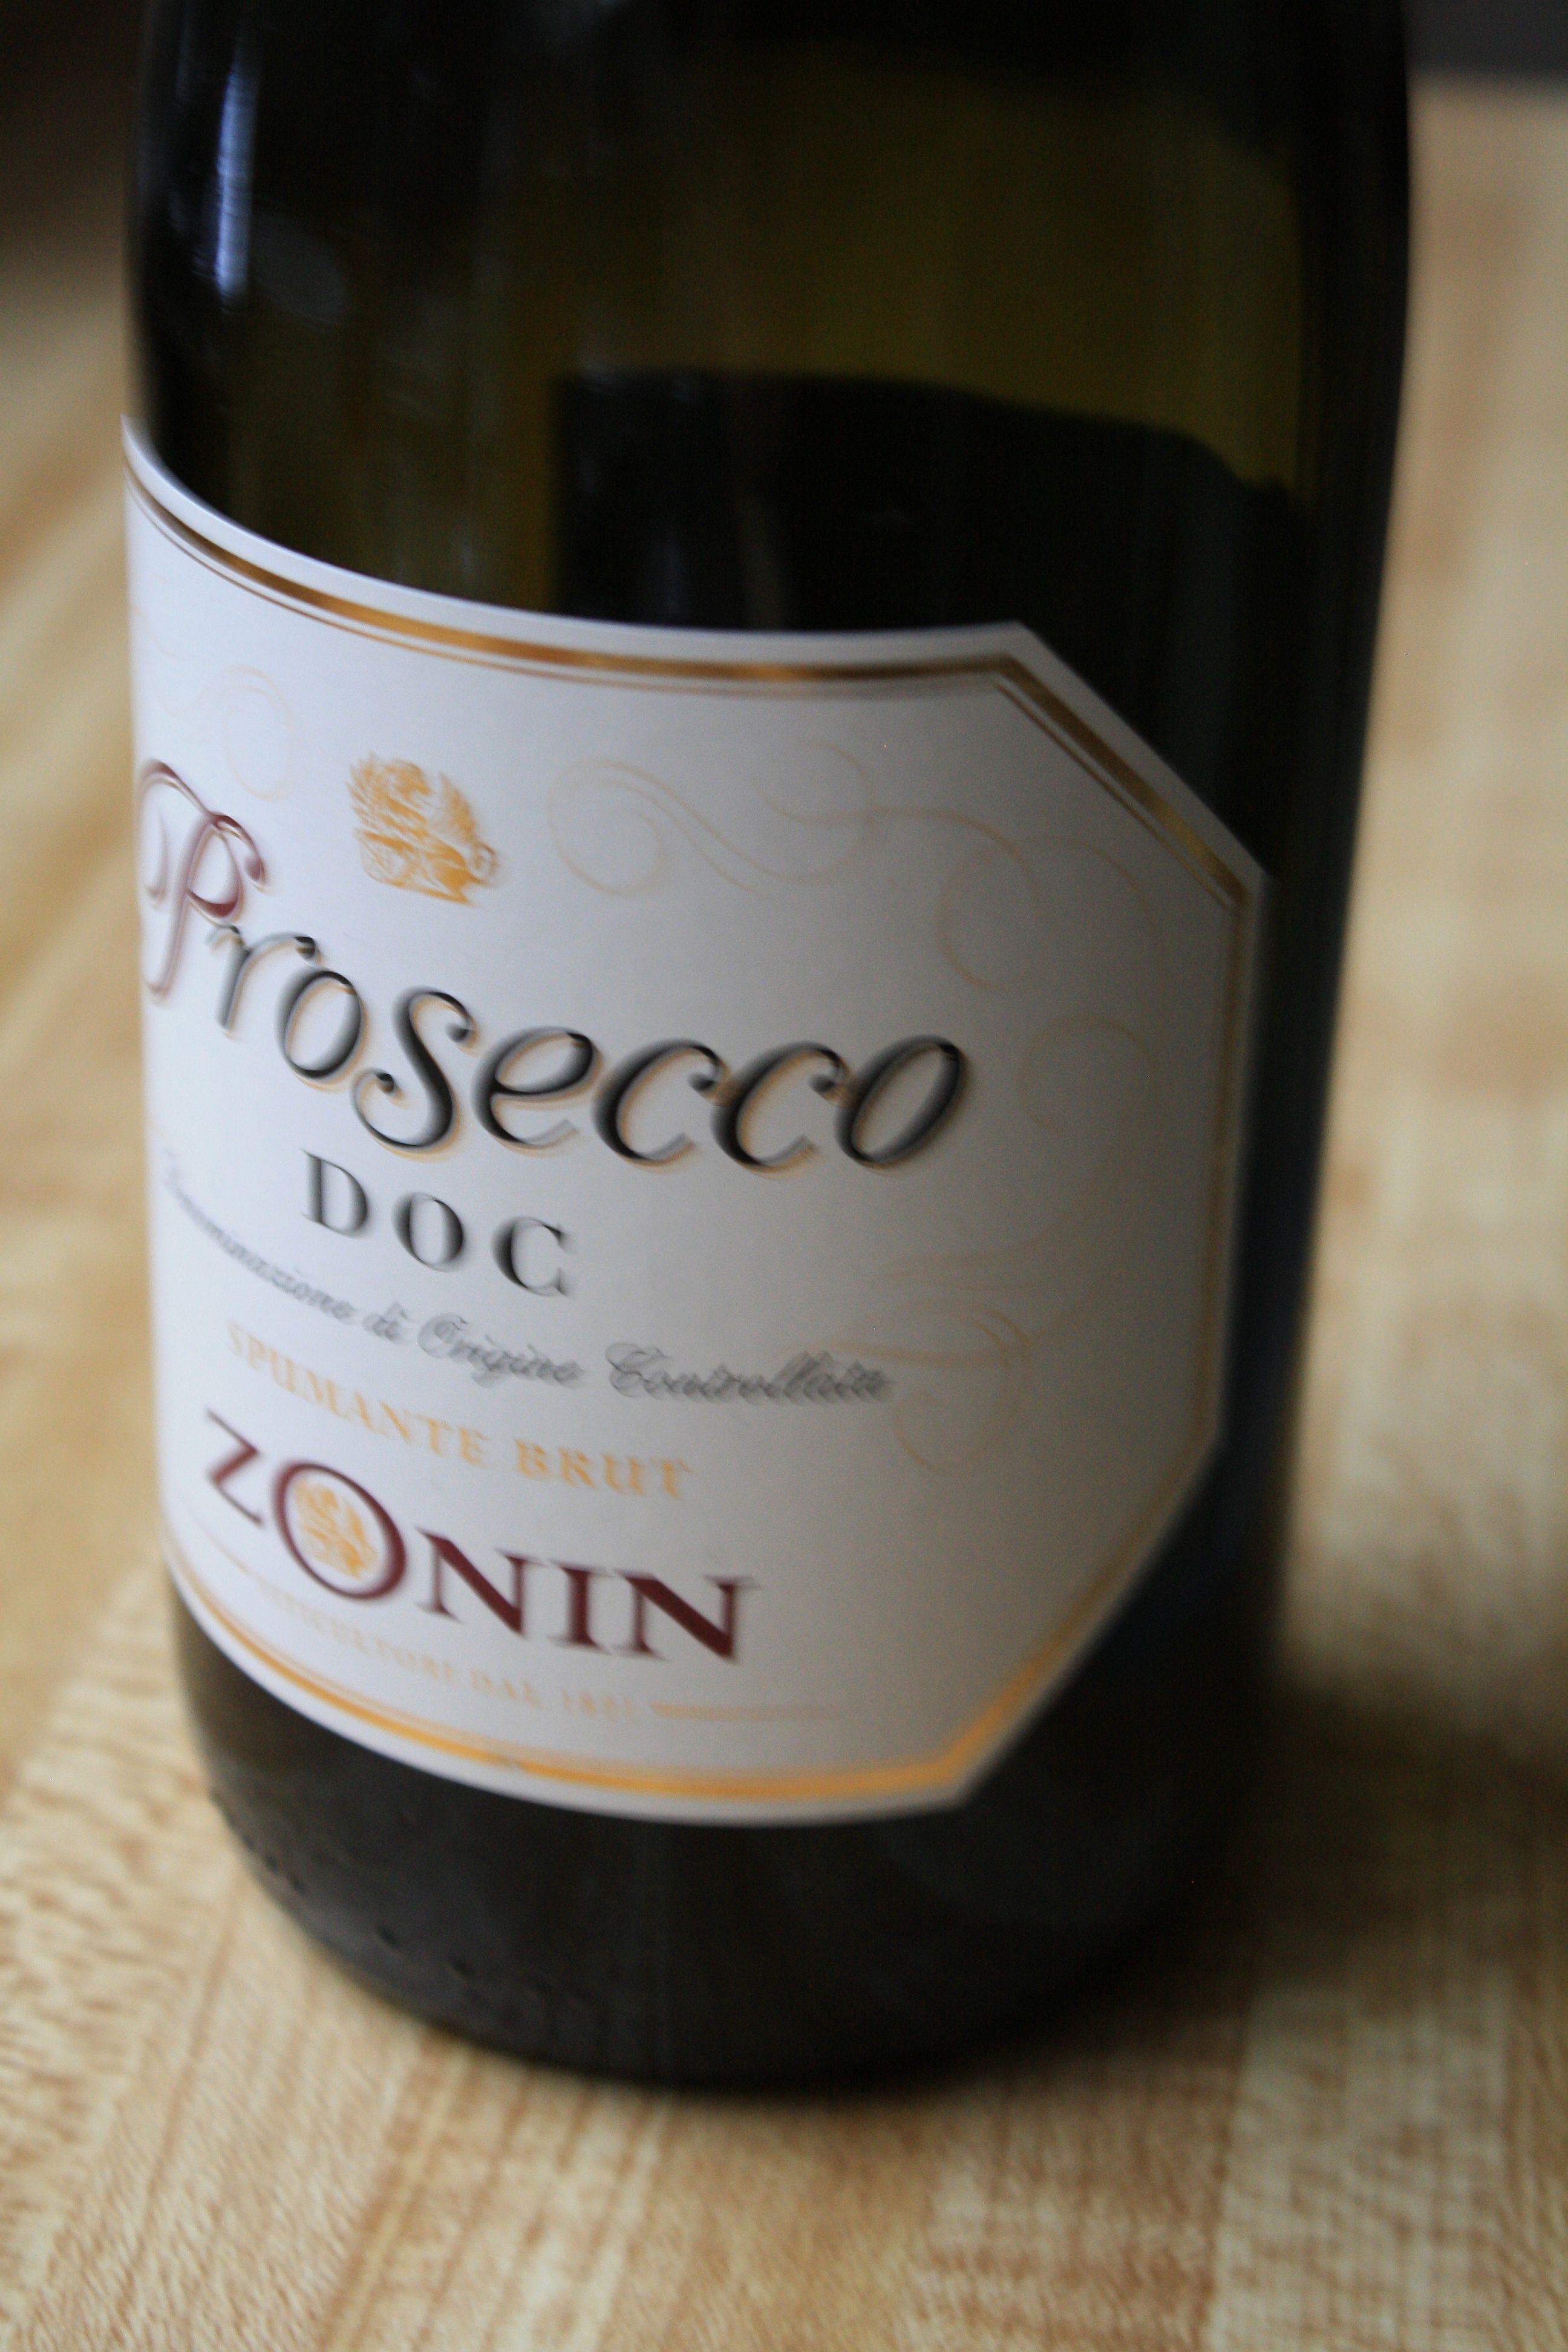 prosecco gives it an extra splash of effervescence